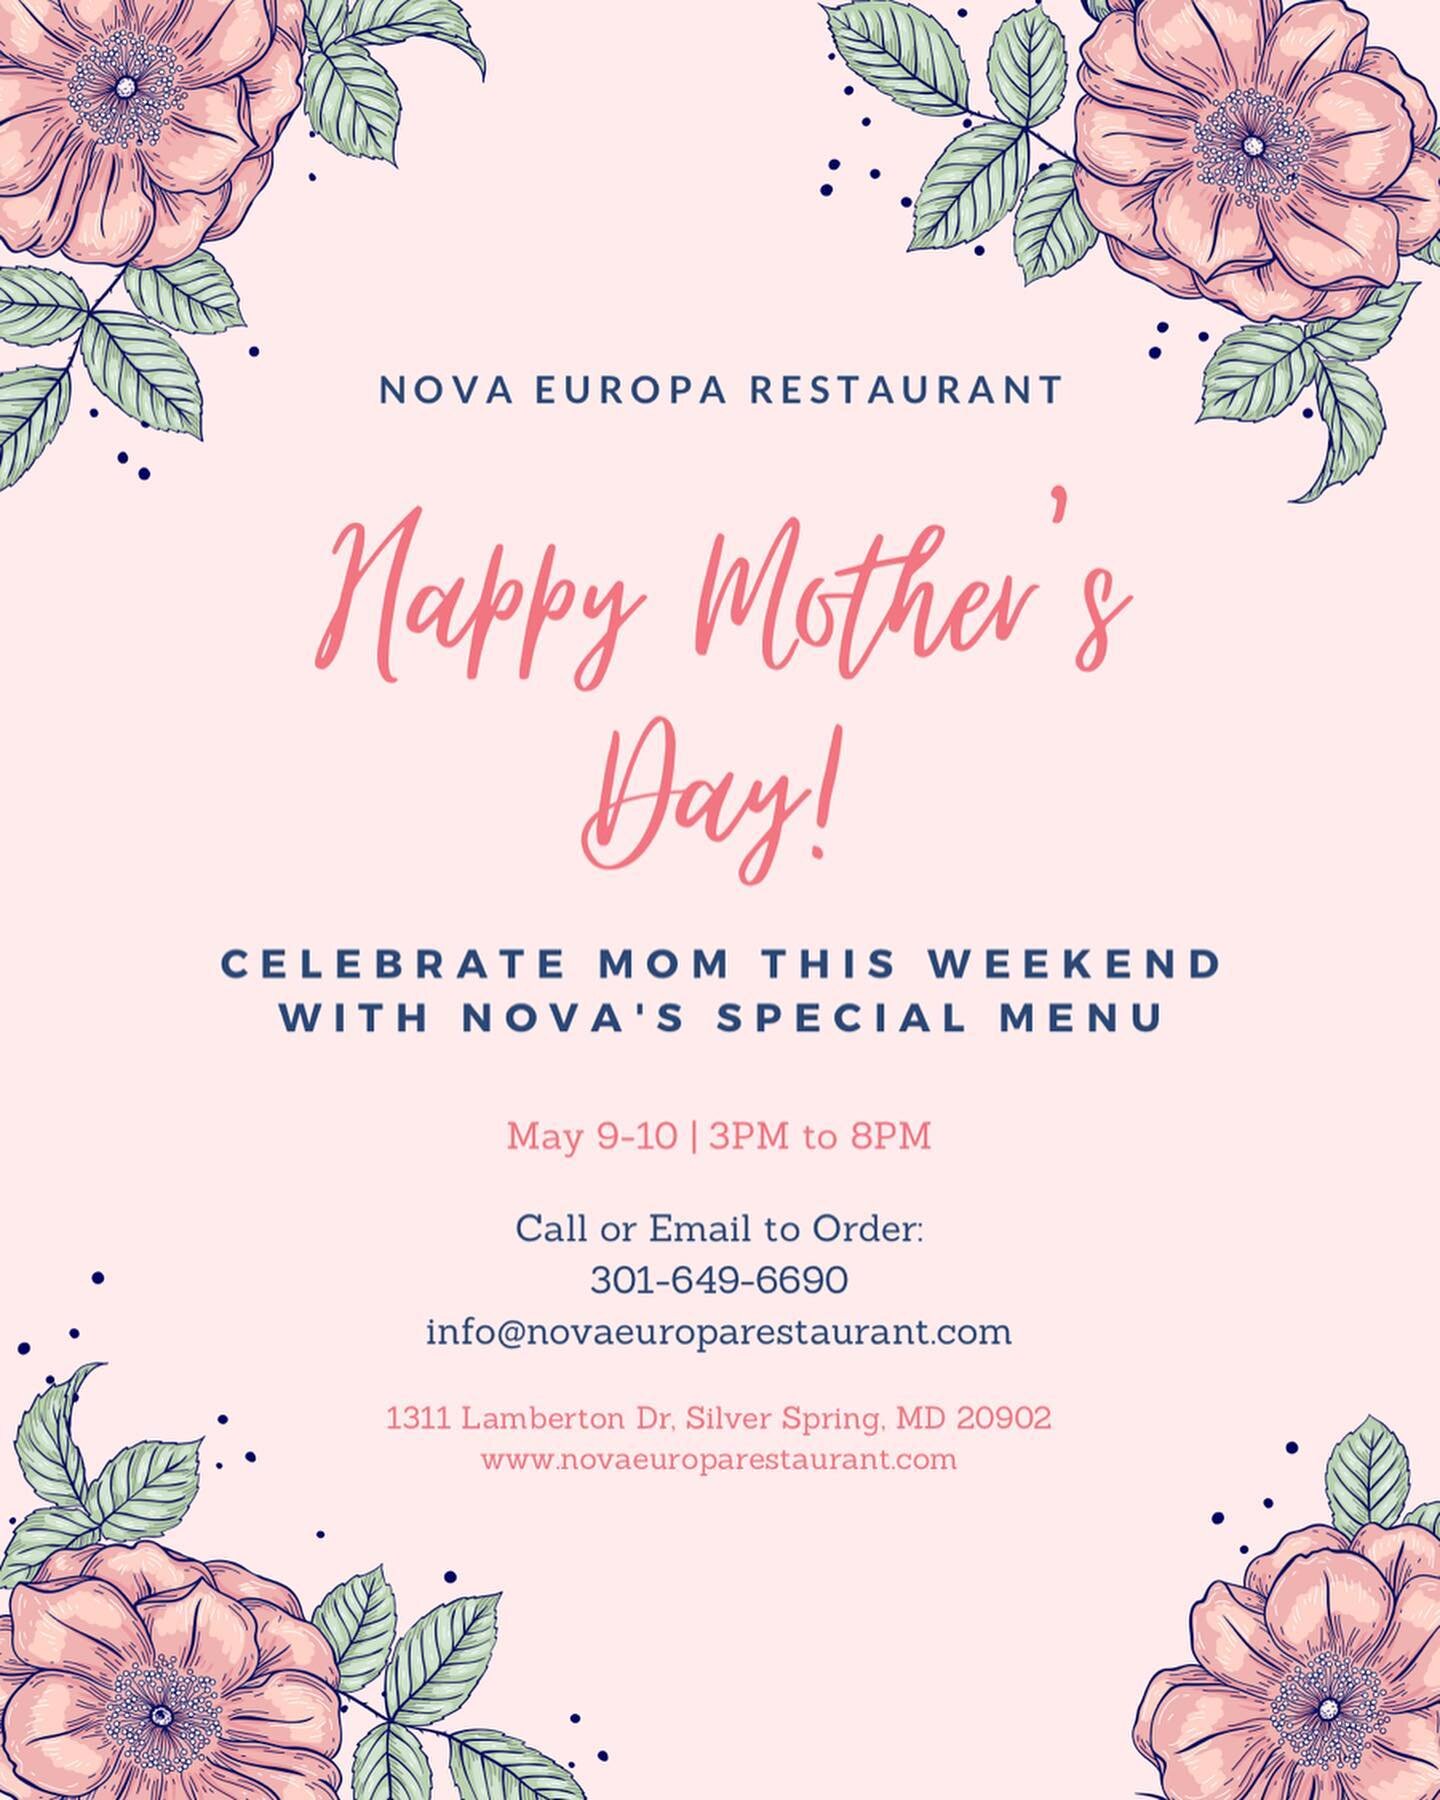 Celebrate Mom this weekend with our special menu! 🌸 💐 Call us at 301-649-6690 or email us to place a carry out order. 
Visit our website (link in bio) for more information!